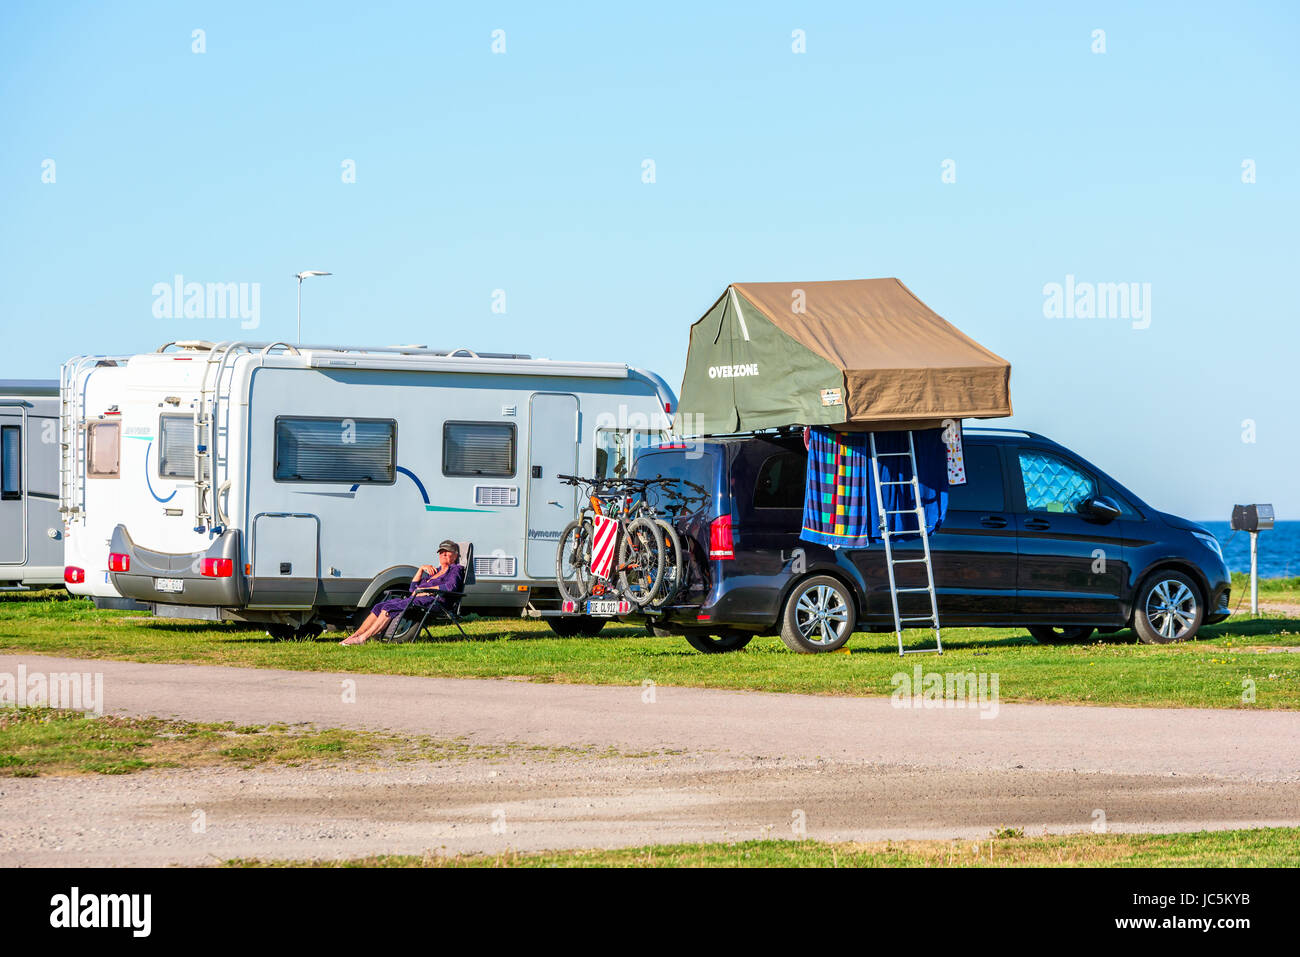 Gronhogen Oland, Sweden - May 28, 2017: Environmental documentary. Foldable tent on top of parked car. Ladder to the ground. Person sitting outside ca Stock Photo